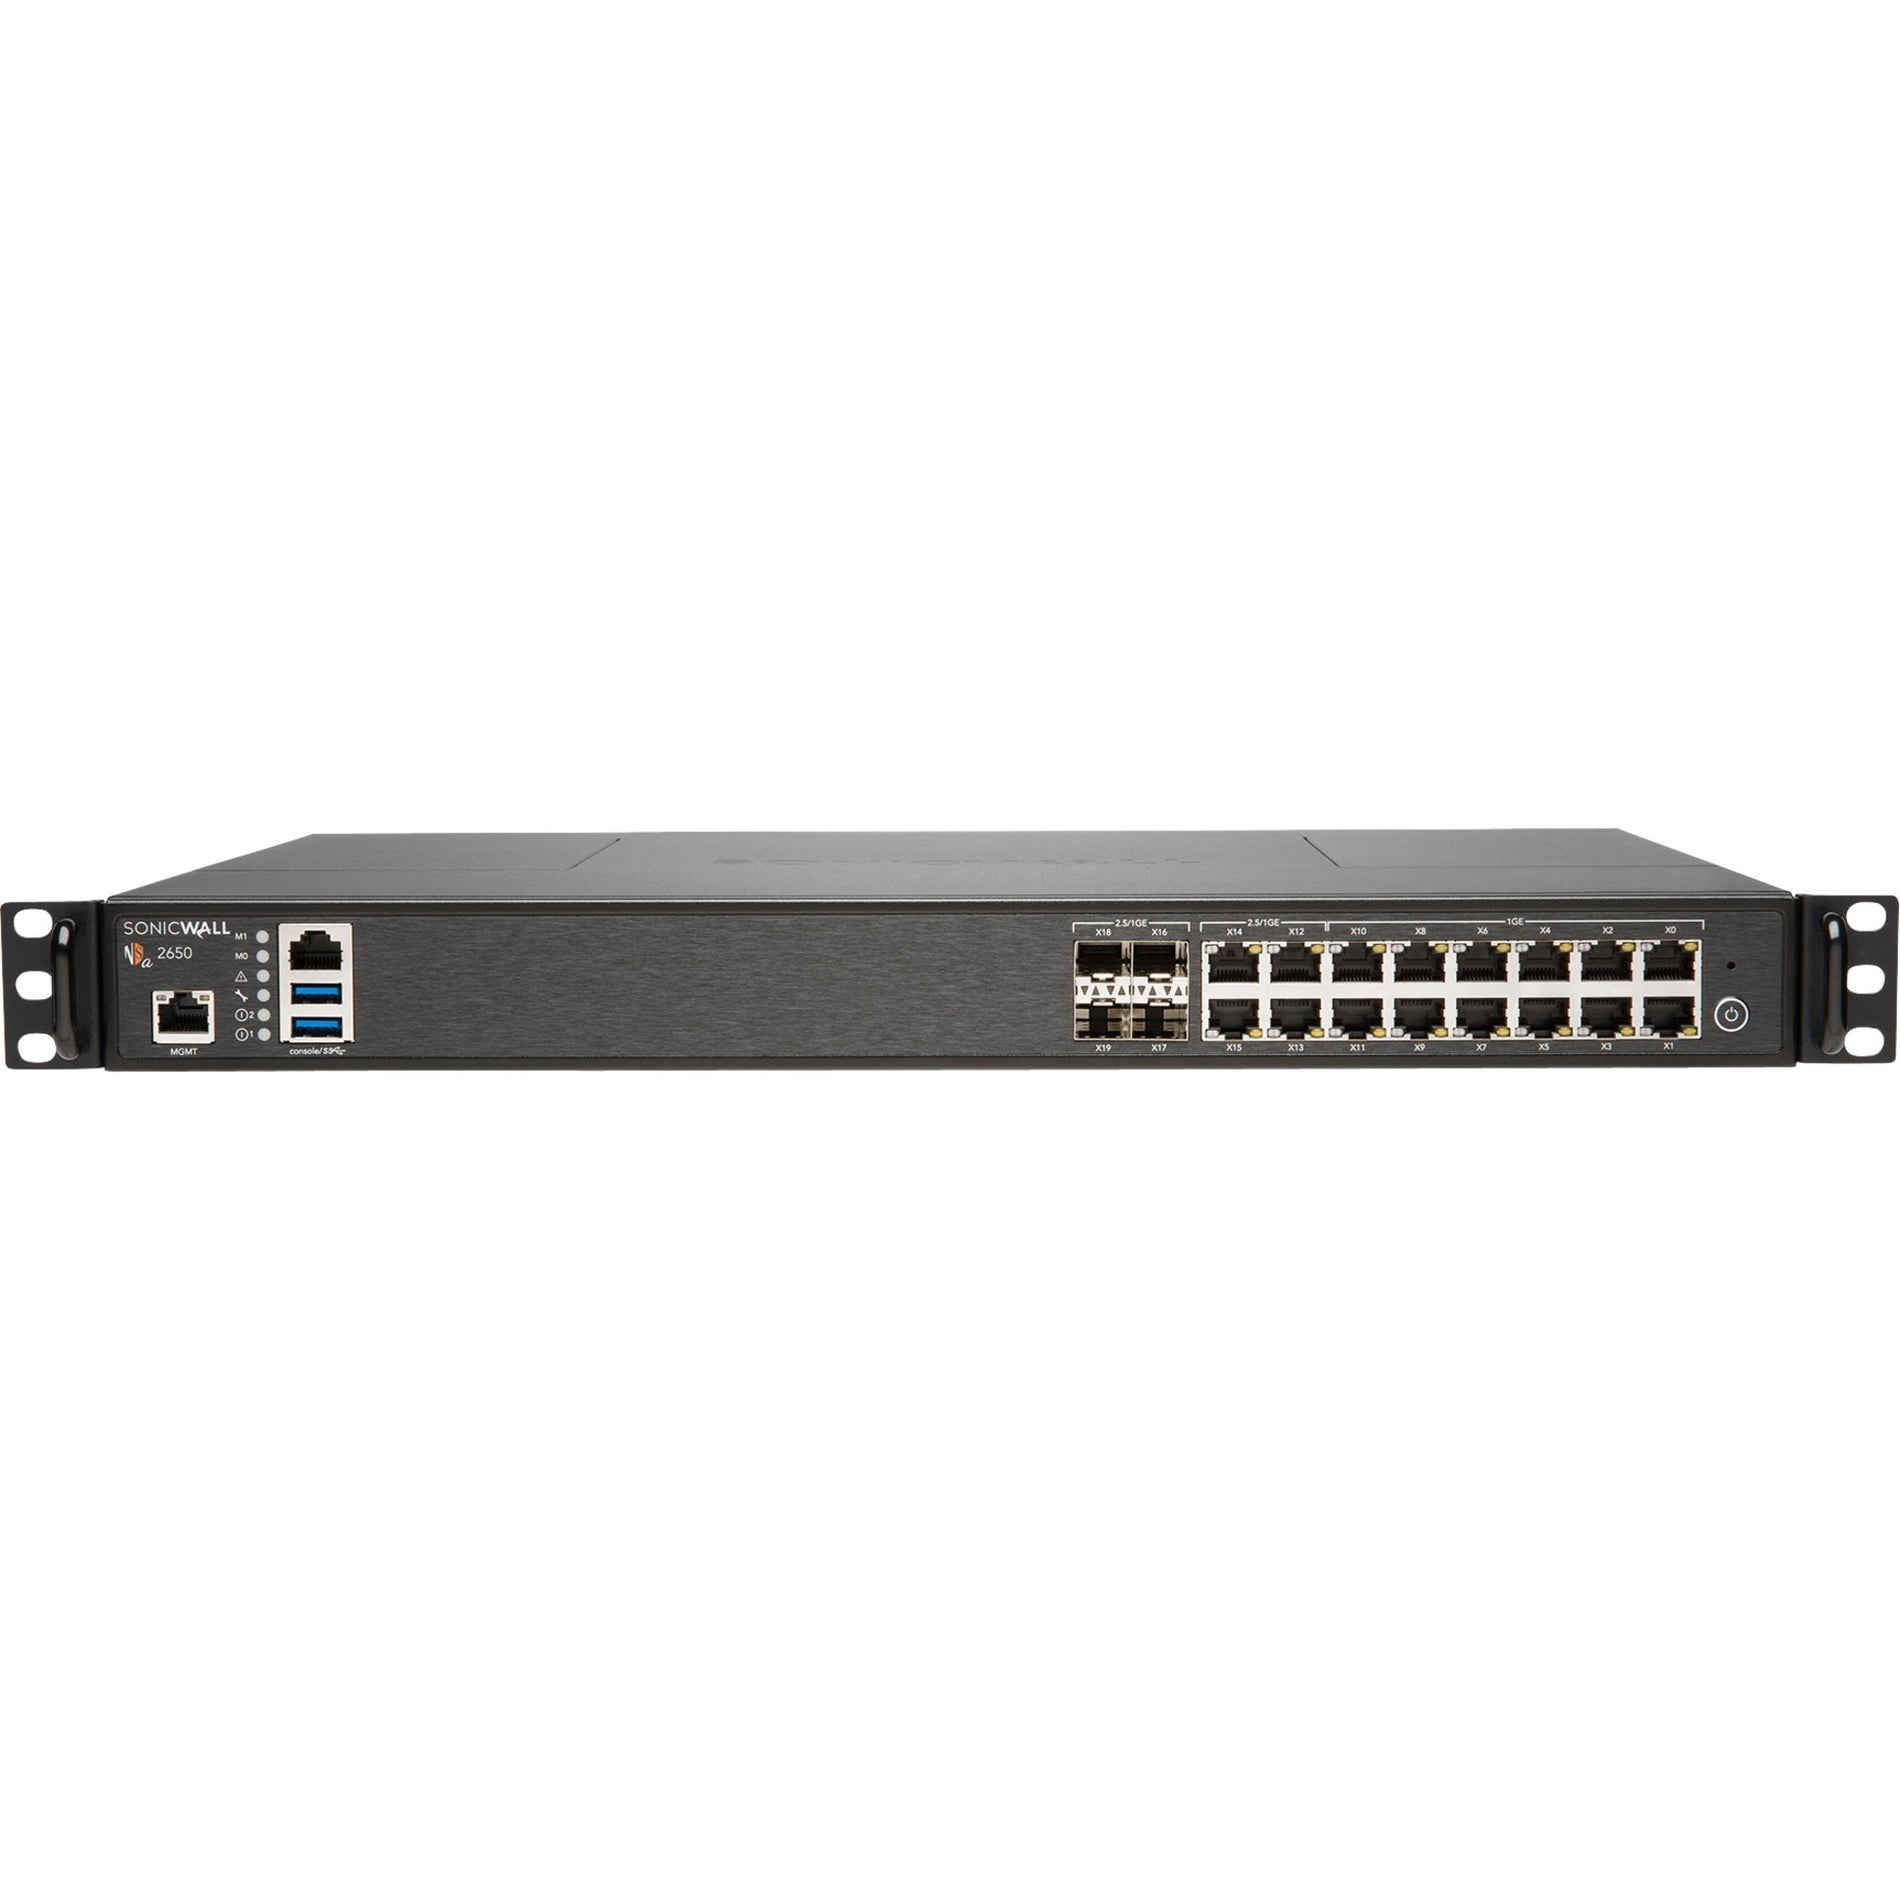 SonicWall 01-SSC-1997 NSA 2650 Network Security/Firewall Appliance, 16 Ports, AES Encryption, 1U Rack-mountable